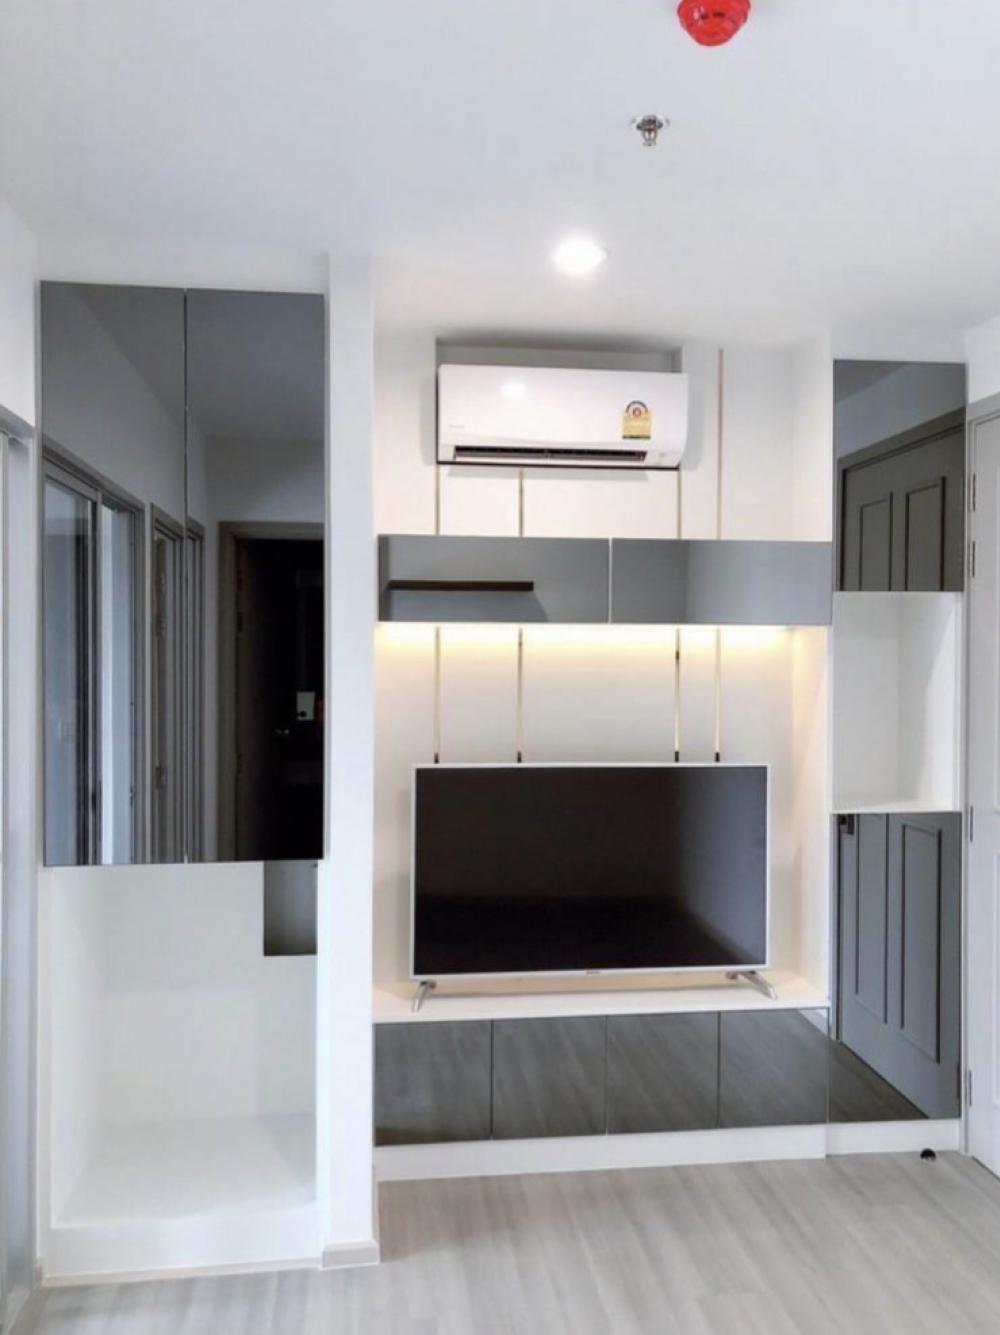 For SaleCondoPinklao, Charansanitwong : The Parkland Charan - Pinklao Condo for sale : 1 bedroom for 29.69 sqm. modern luxury decoration on 9th floor. B building With closed kitchen , fully furnished and electrical appliances.Next to MRT Bangyikhan​.Sale only for 3.1 MB.